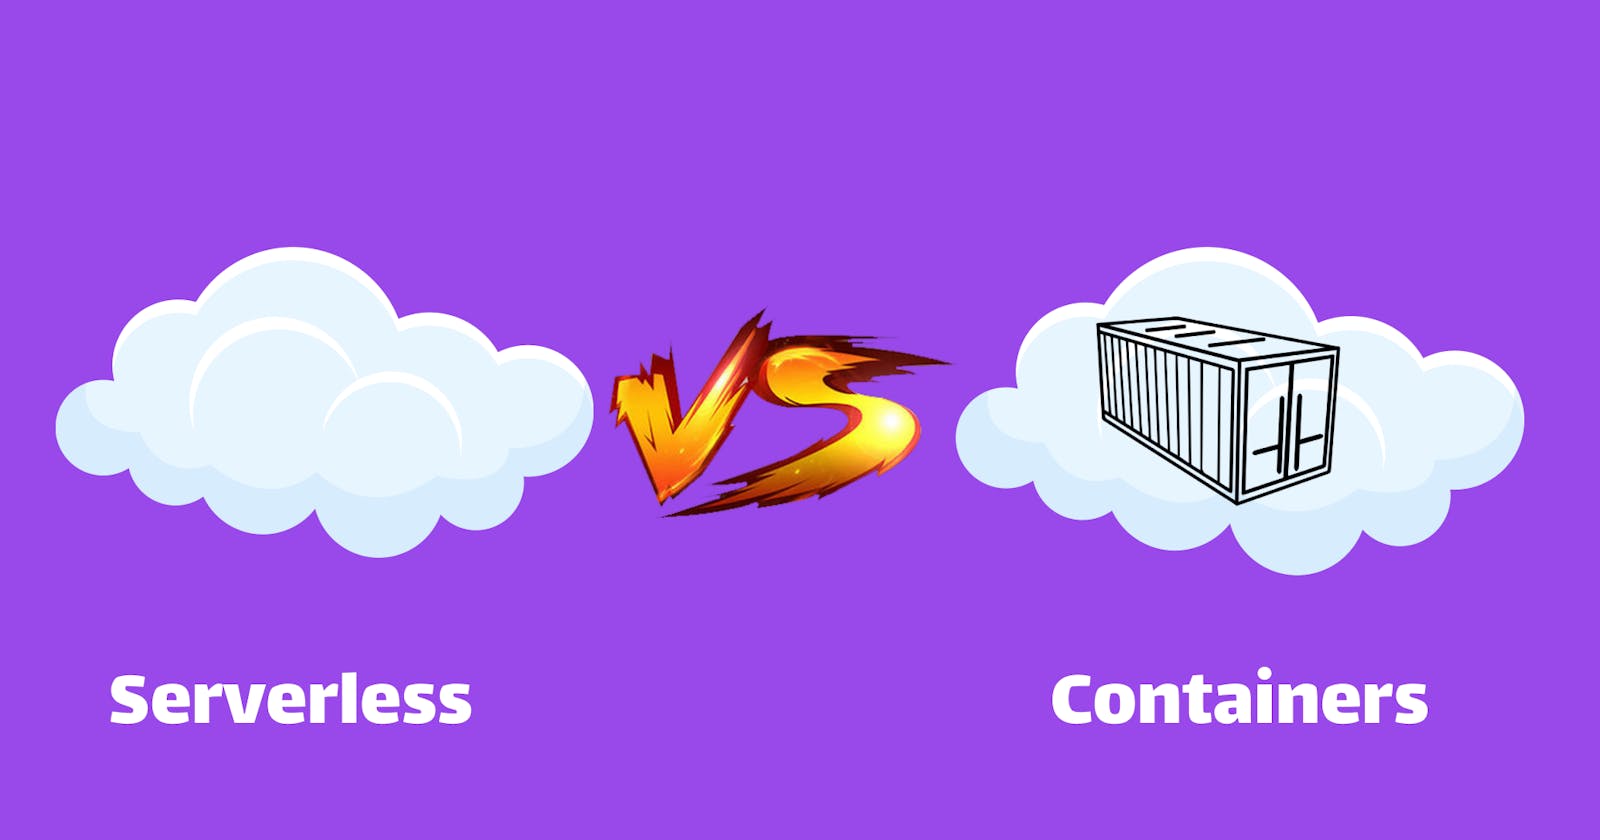 Containers vs Serverless - Pros, Cons, and Key Differences